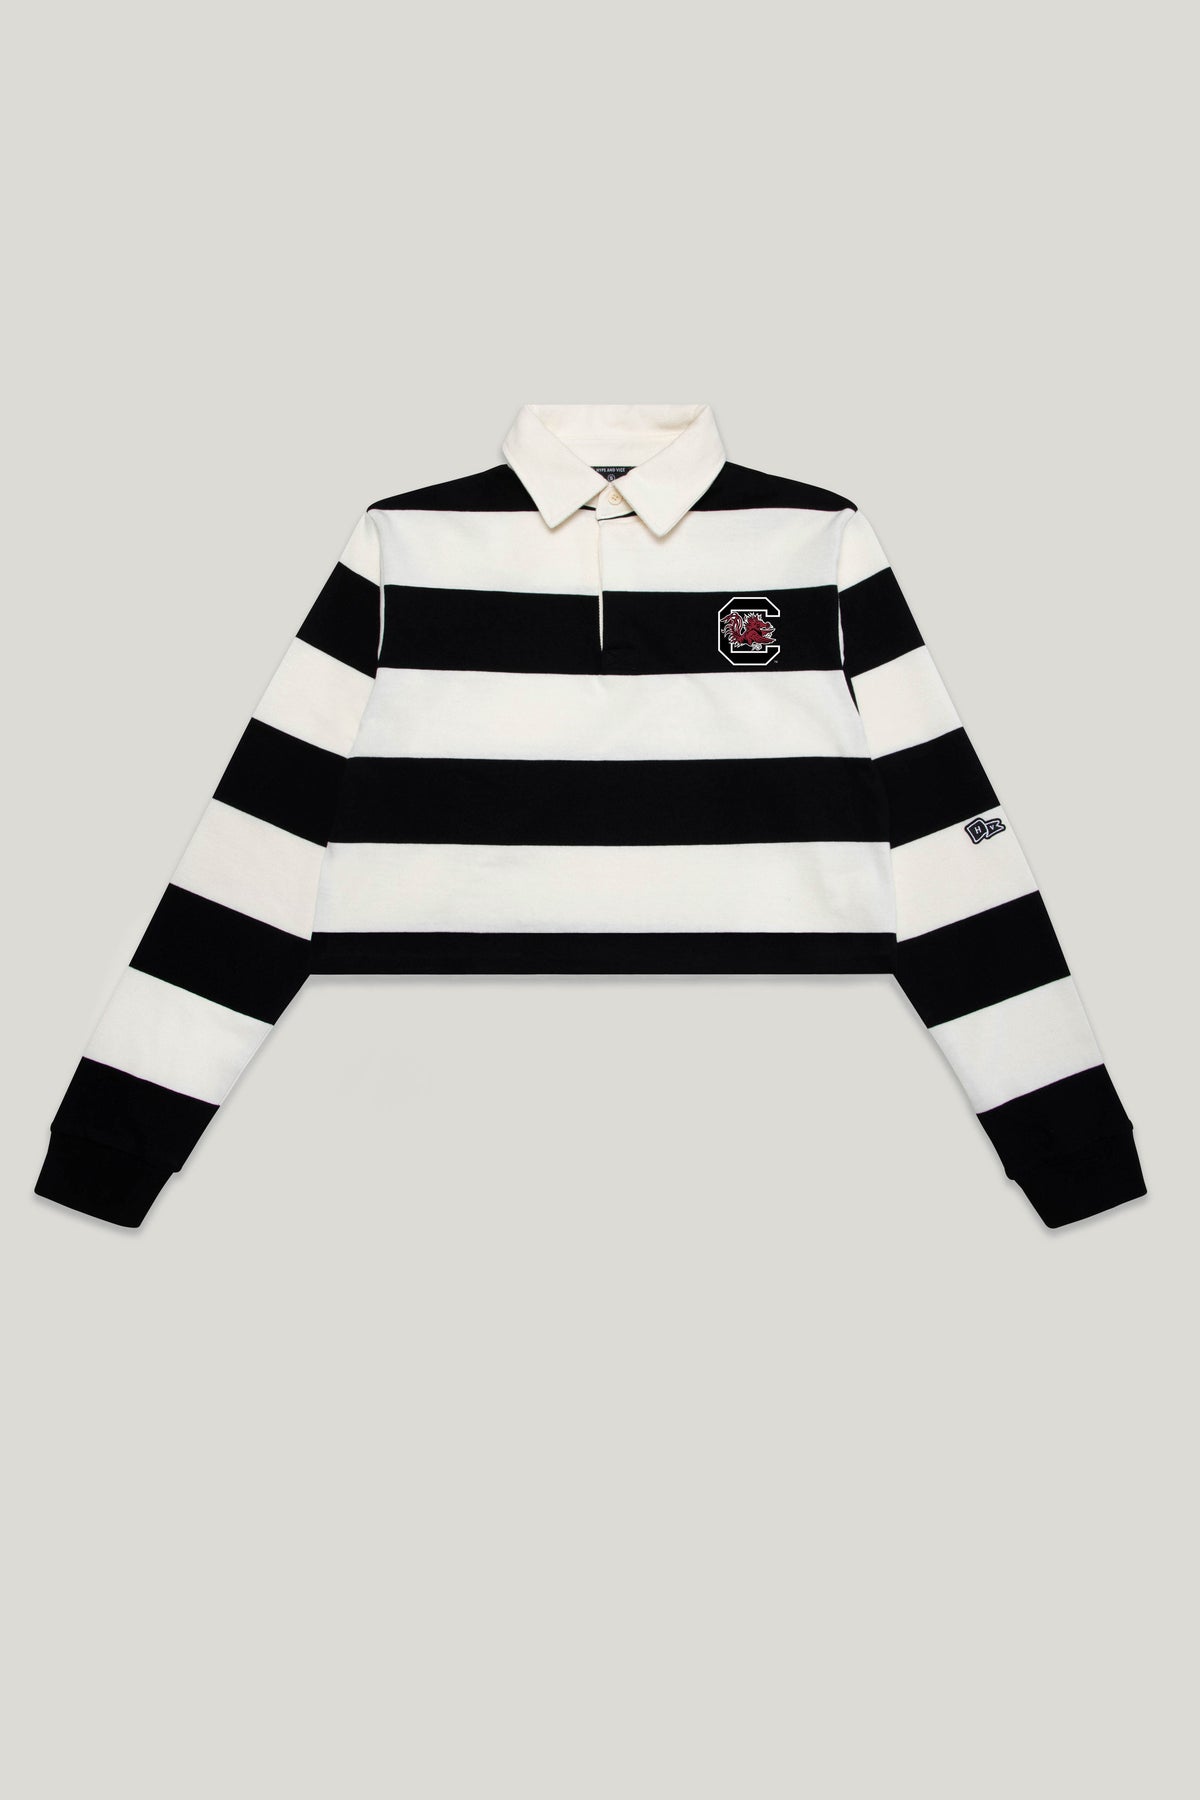 University of South Carolina Rugby Top